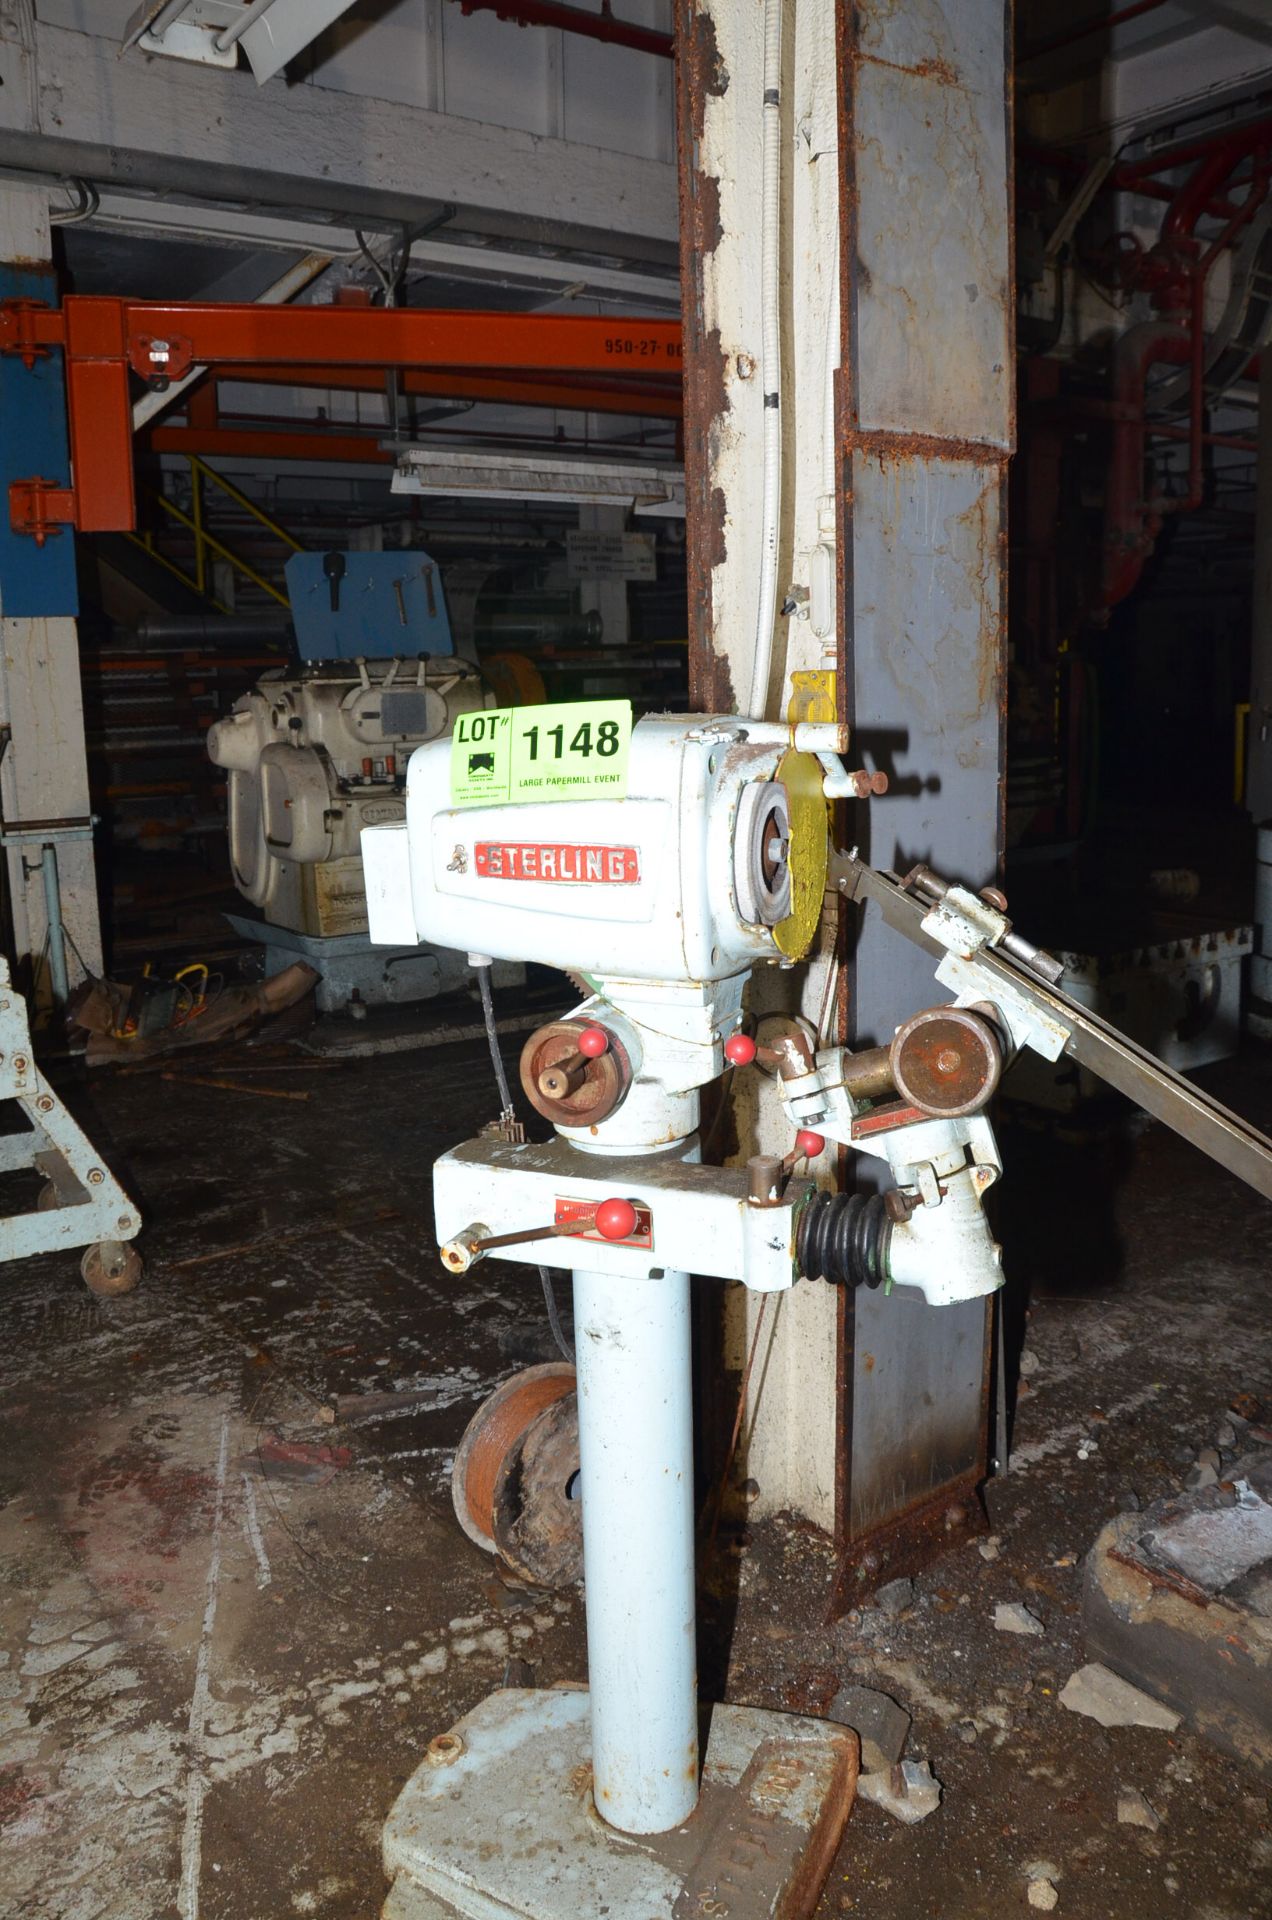 STERLING 2" PEDESTAL DRILL GRINDER, S/N DG0263 [RIGGING FEES FOR LOT #1148 - $60 USD PLUS APPLICABLE